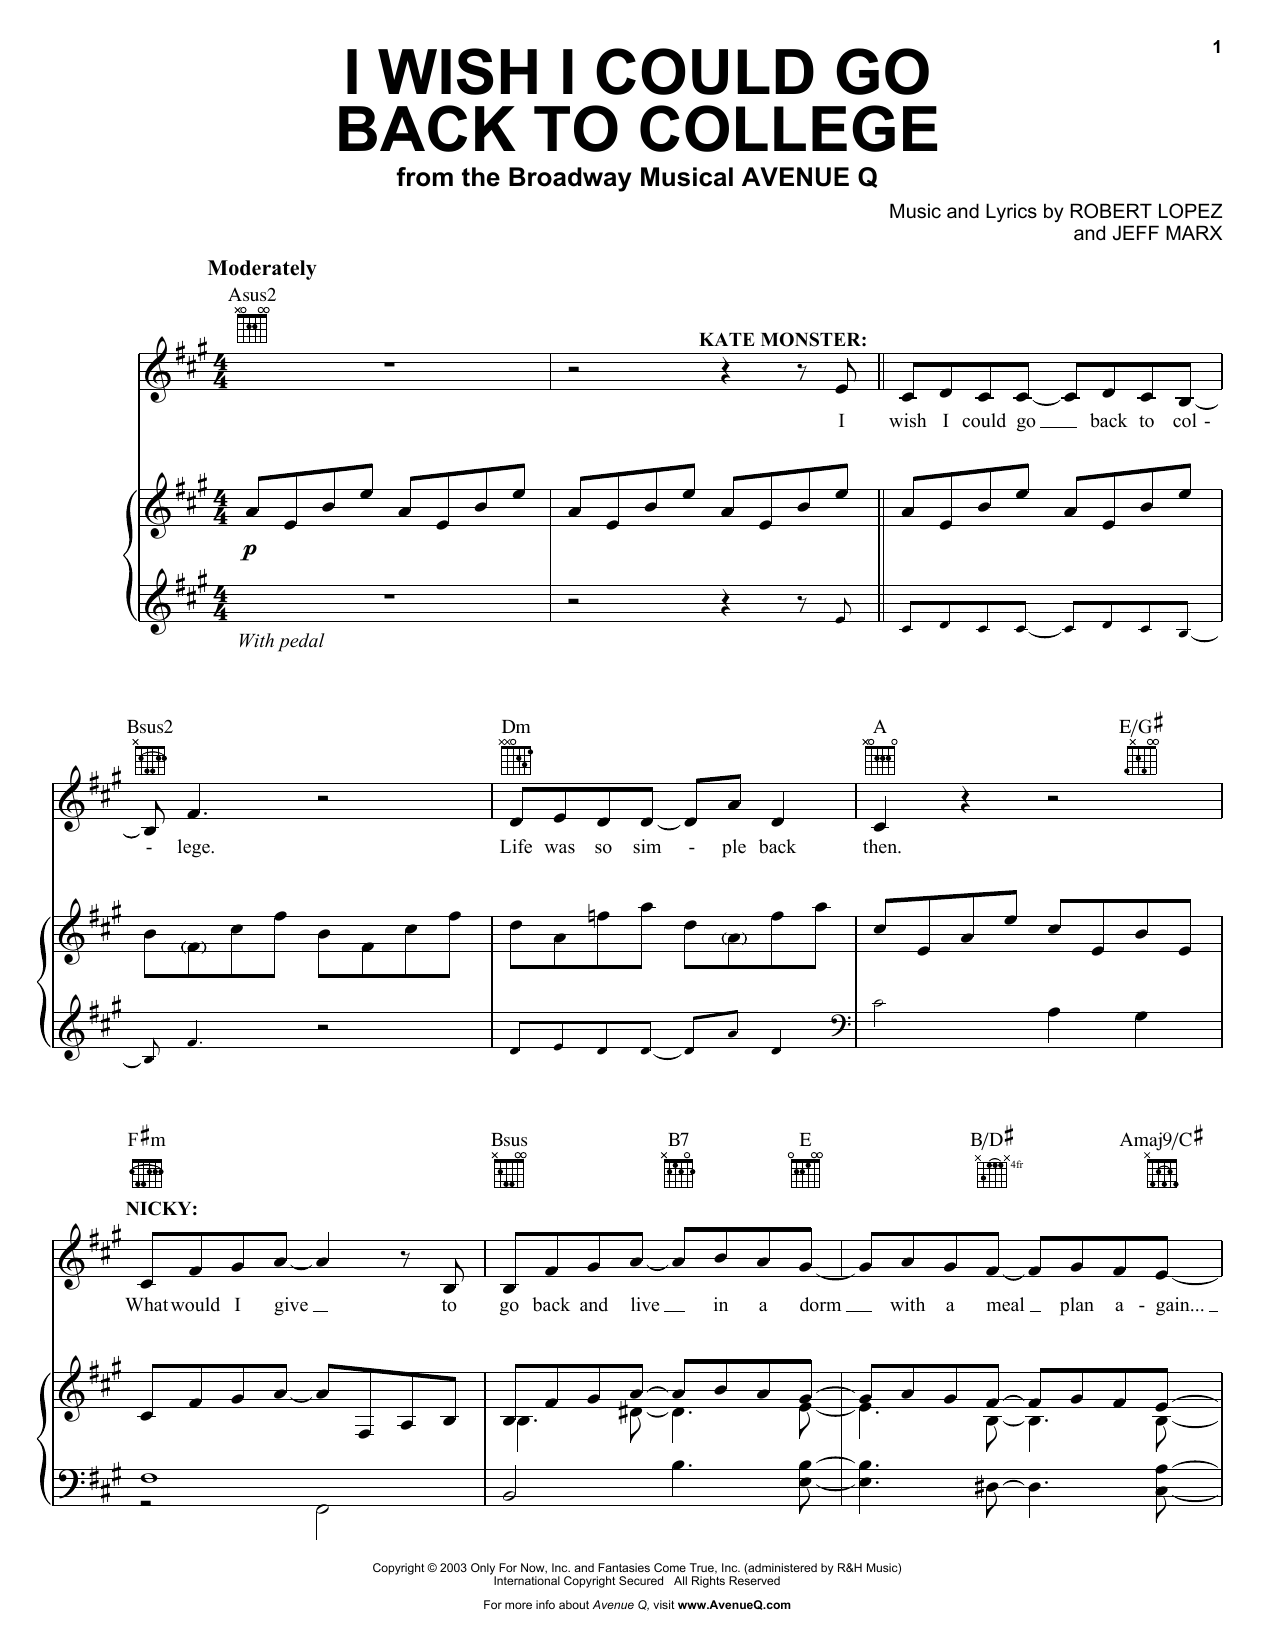 Avenue Q I Wish I Could Go Back To College sheet music notes and chords. Download Printable PDF.